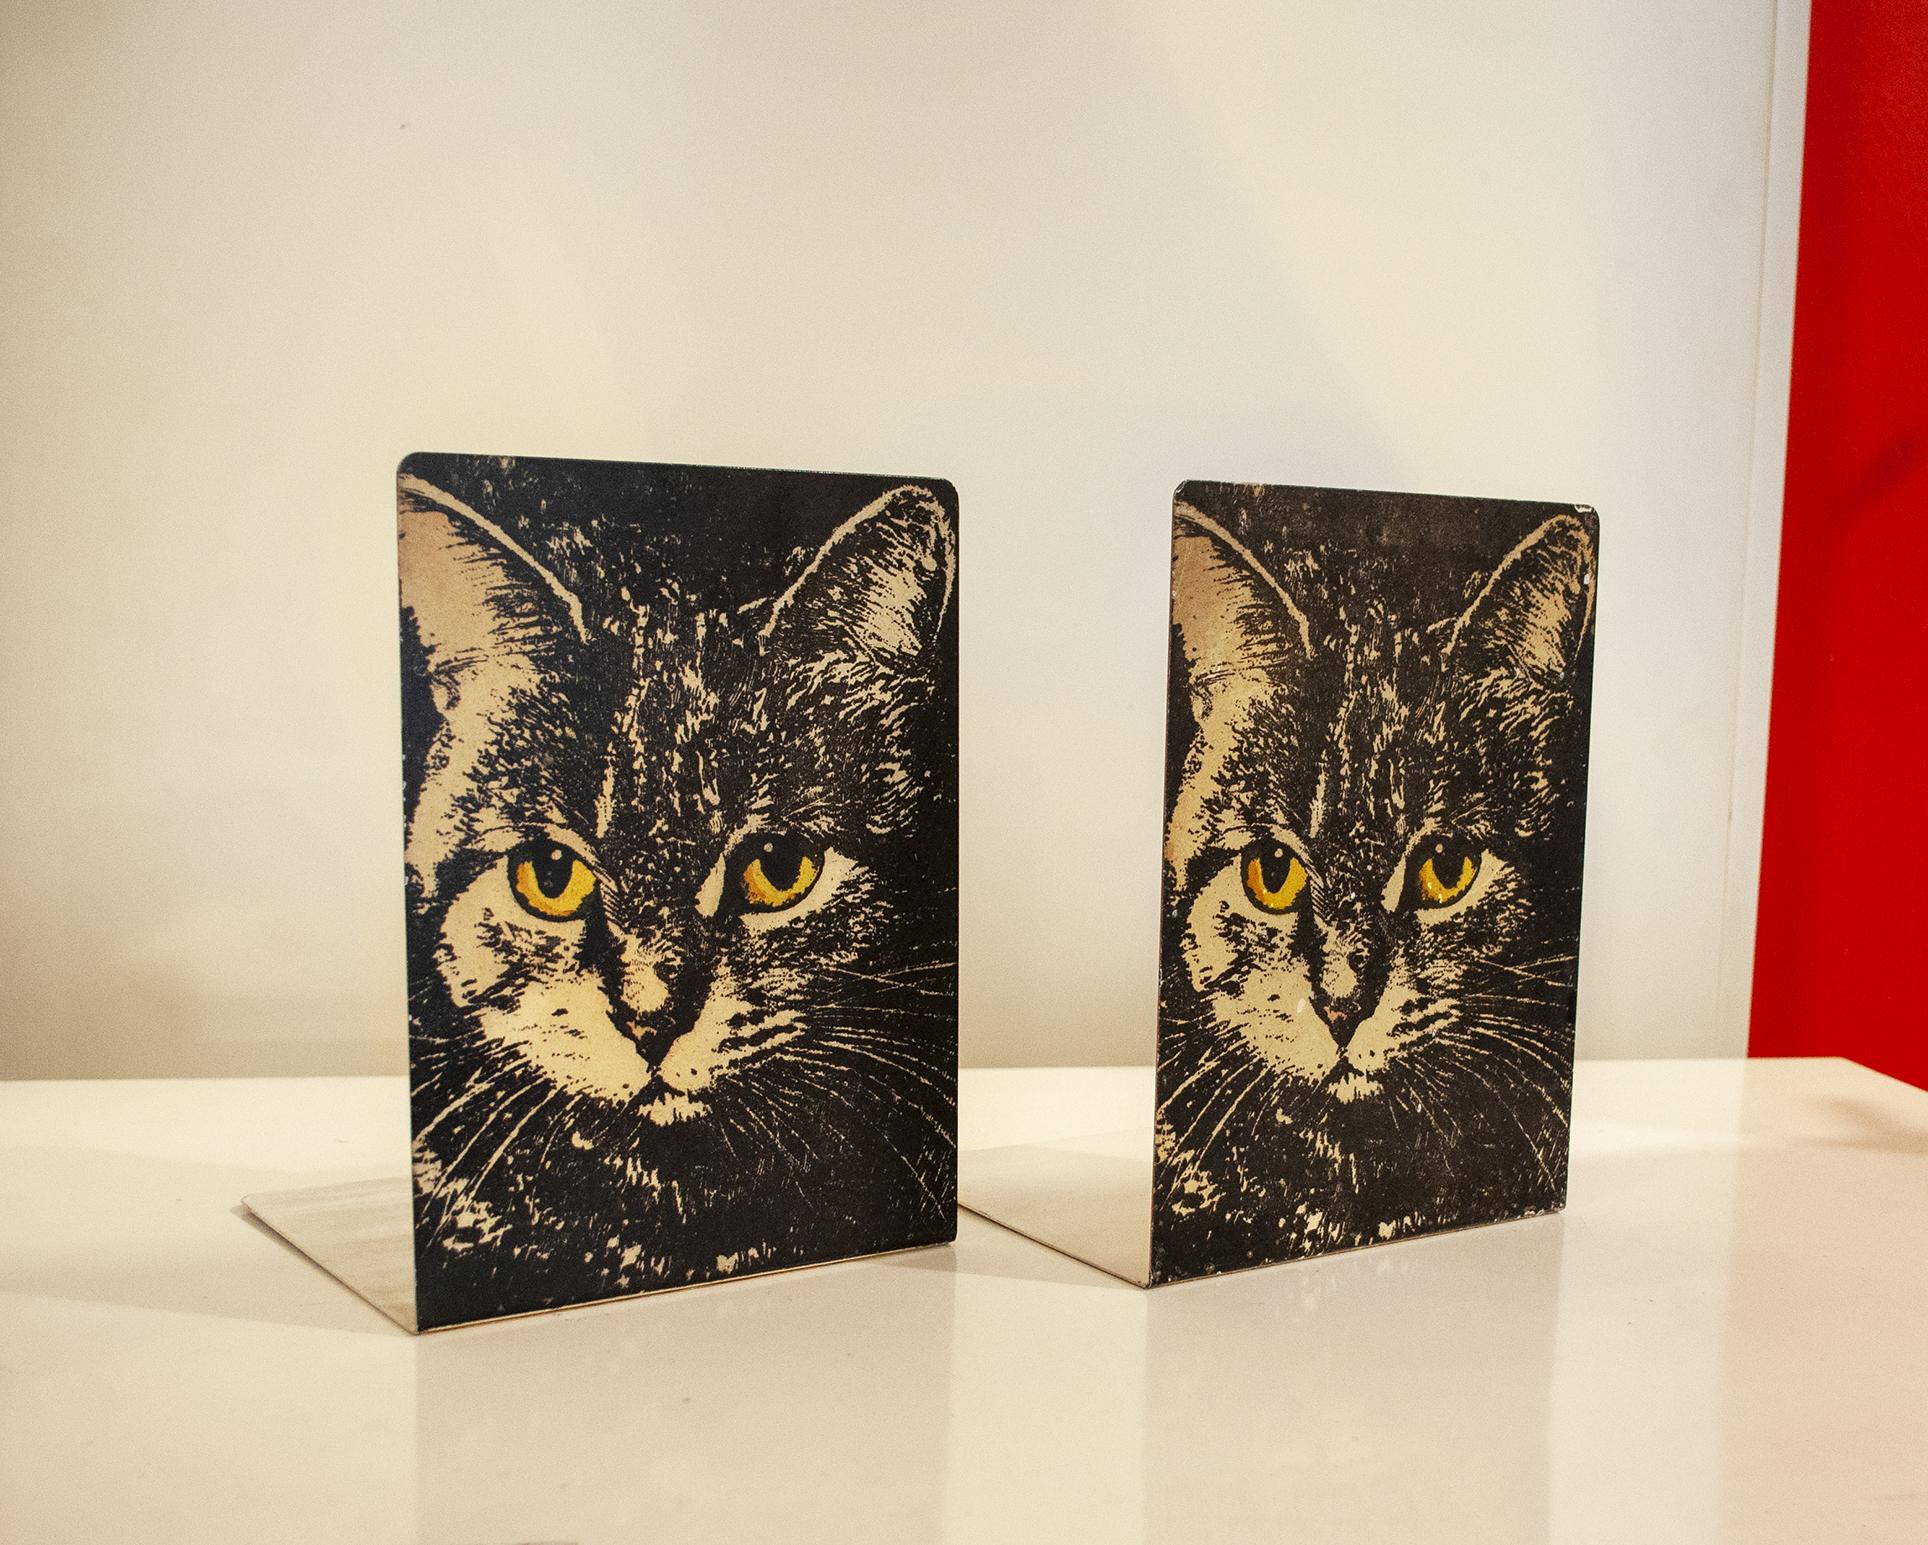 Mid-Century Modern Pair of Vintage Bookends by Fornasetti for Atelier Fornasetti, 1960s For Sale